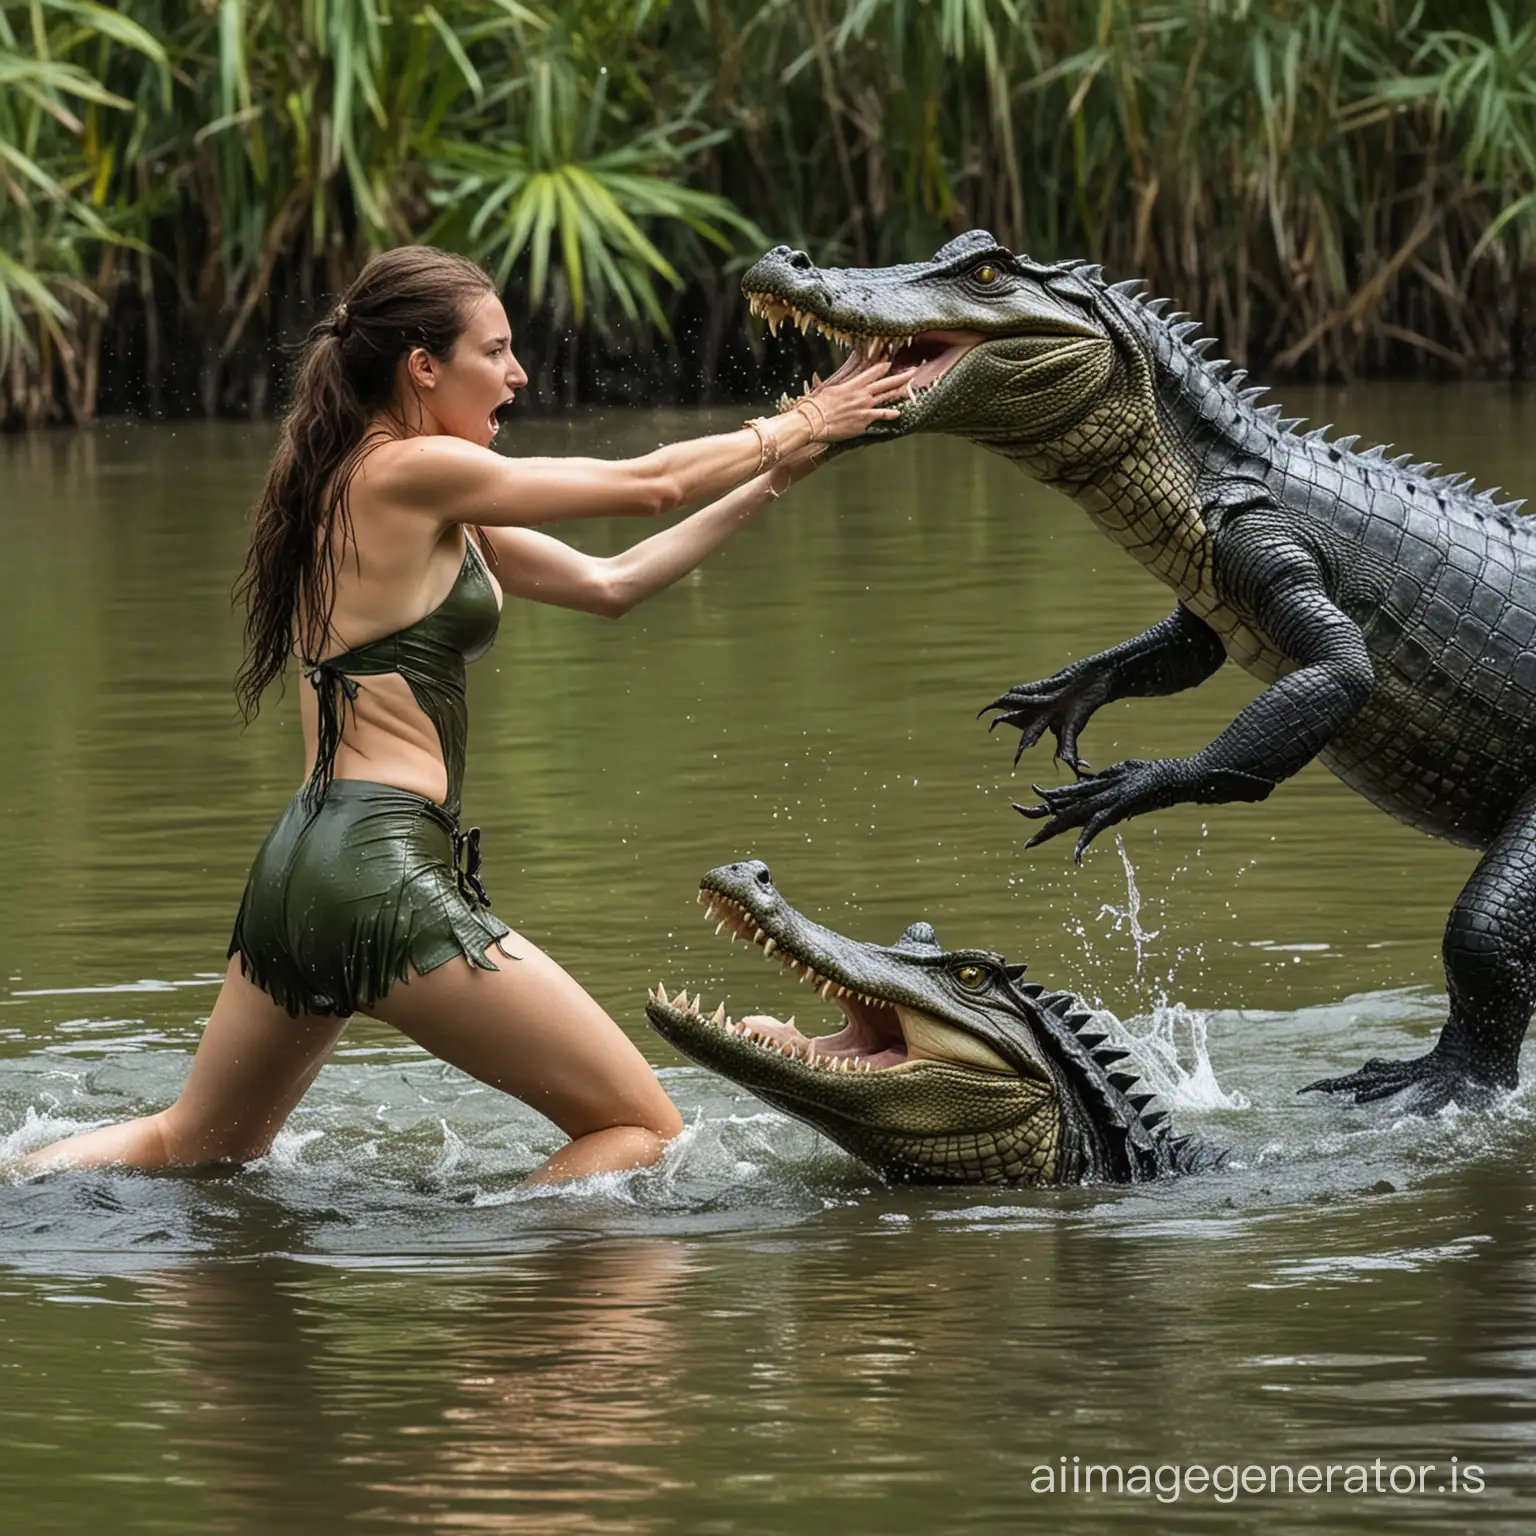 a water nymph fighting an alligator.